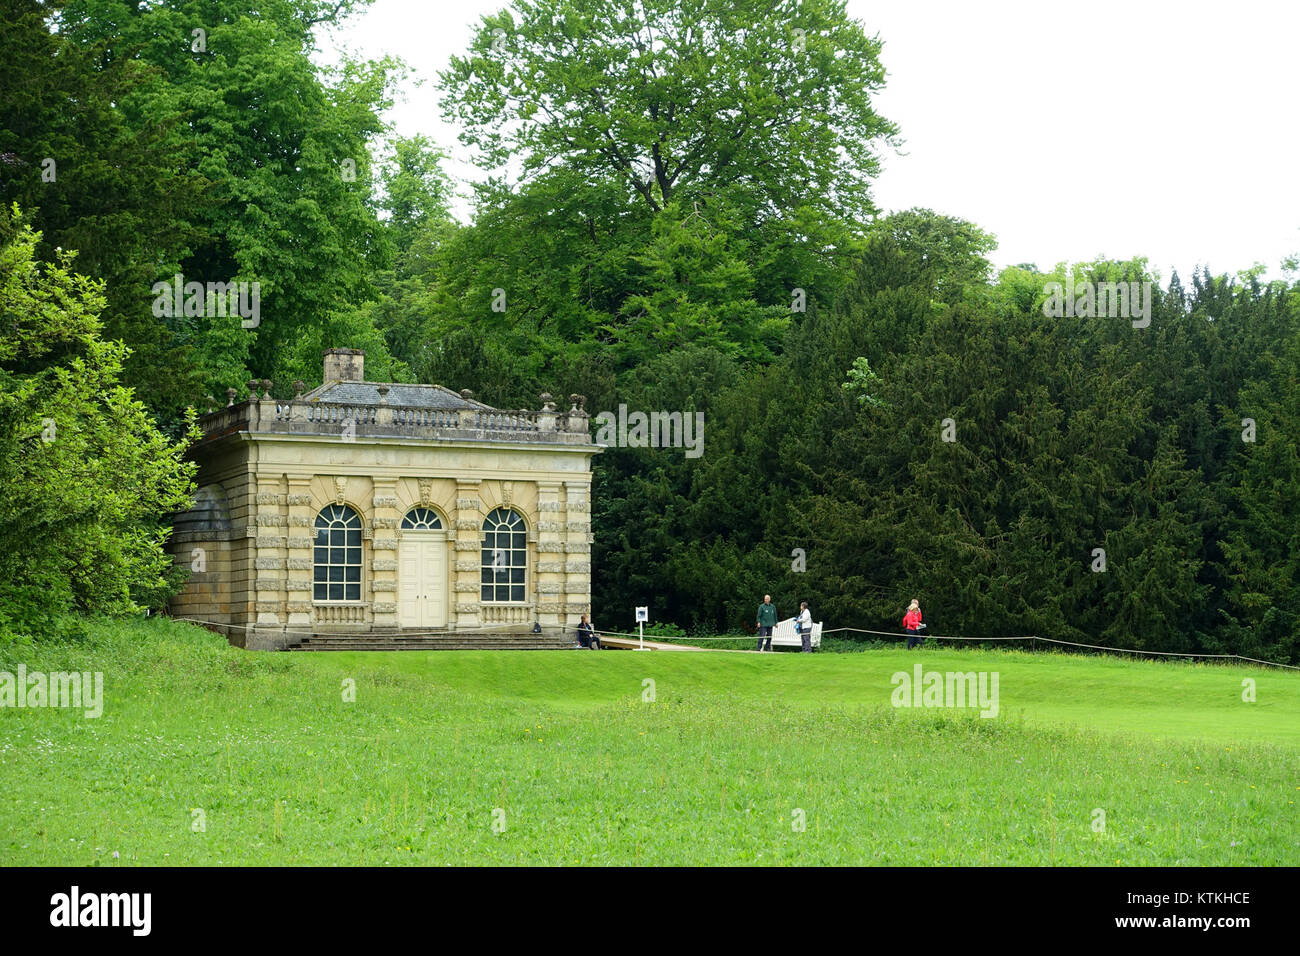 Banqueting House, Studley Royal Park   North Yorkshire, England   DSC00708 Stock Photo